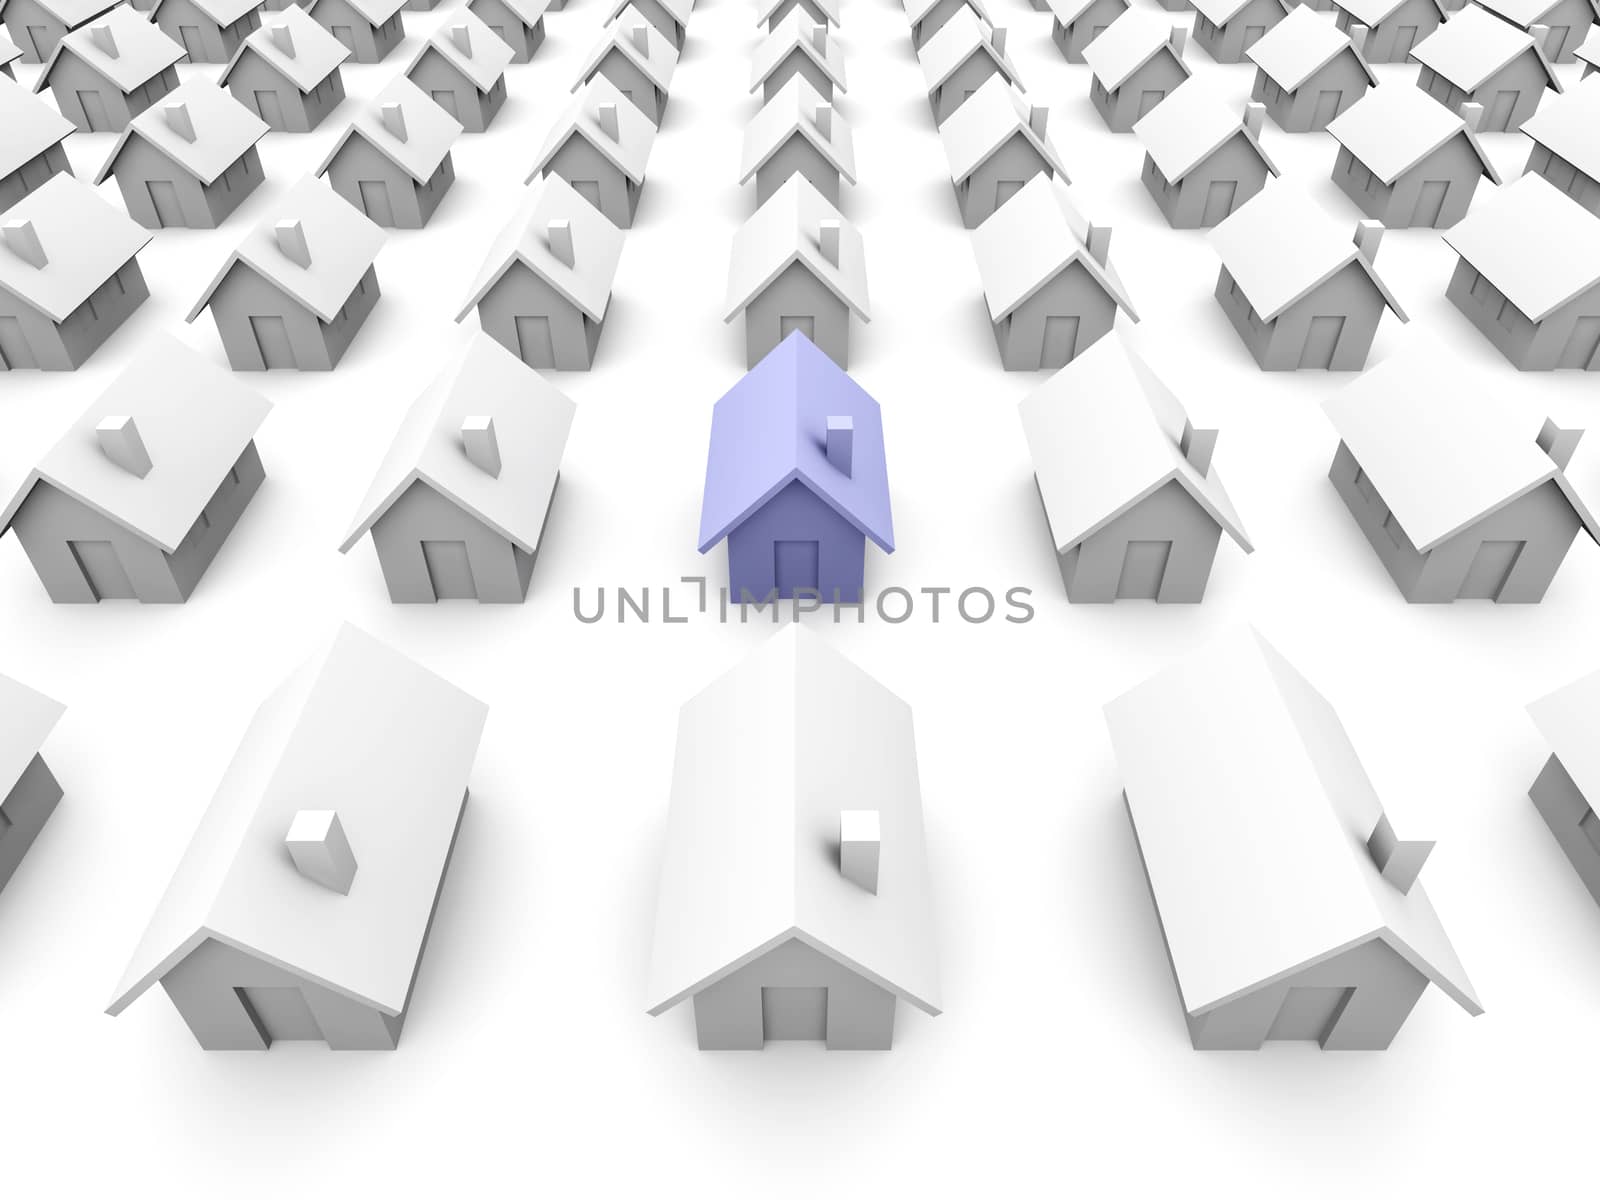 Your special house...
3D rendered Illustration. Isolated on white.